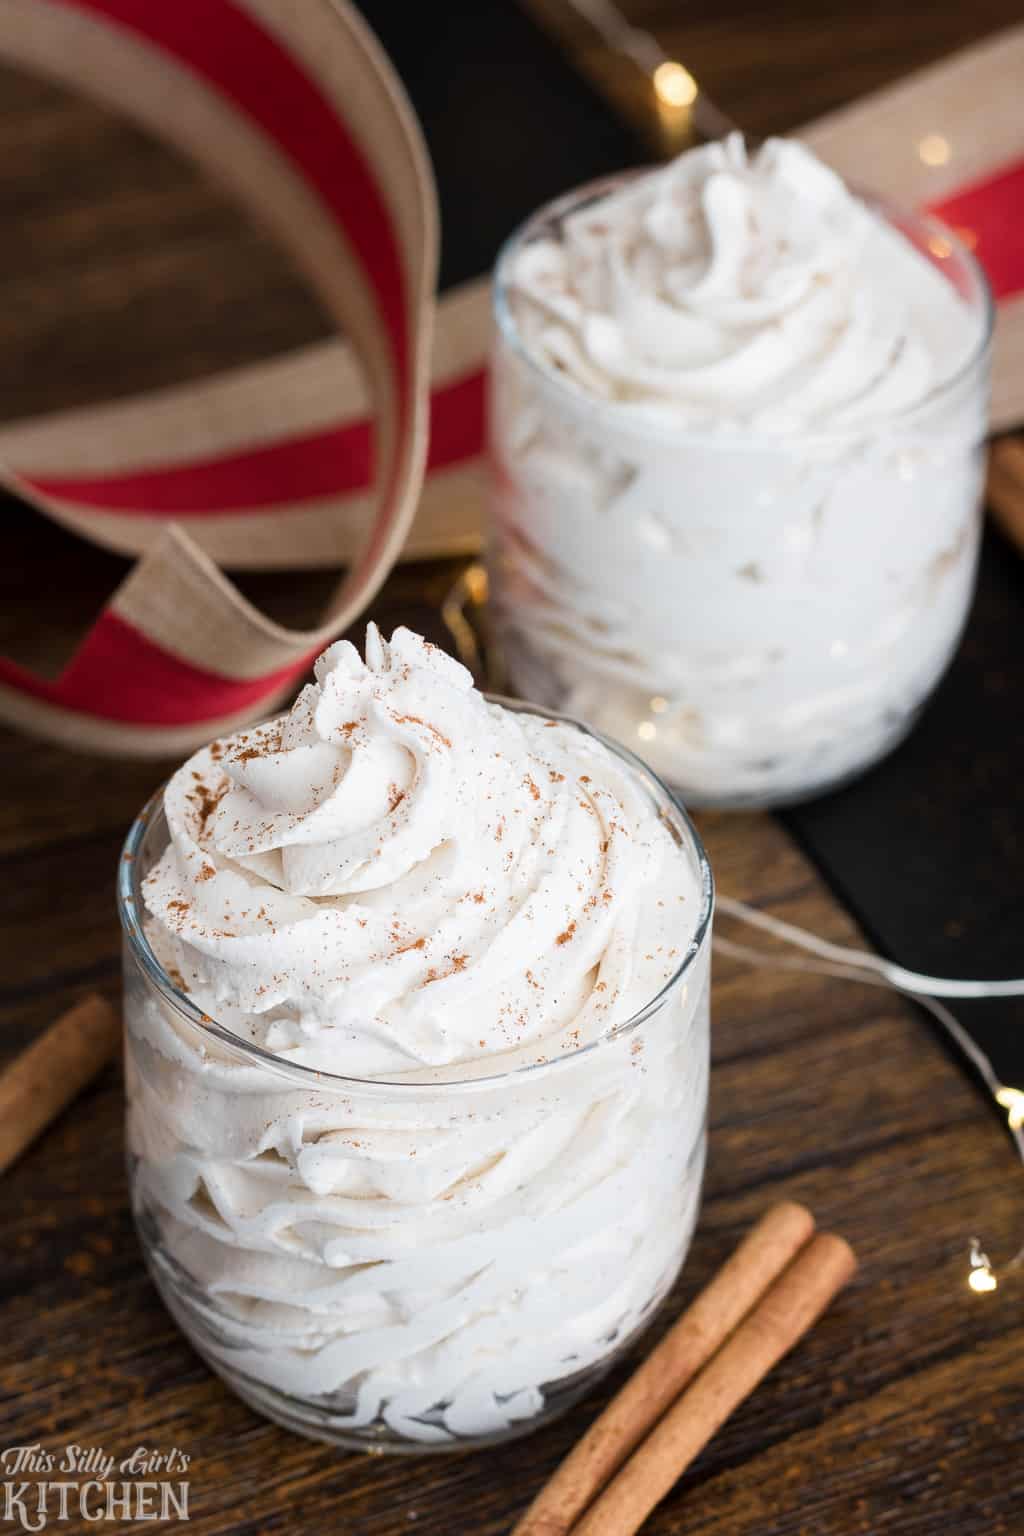 Cinnamon Stabilized Whipped Cream, foolproof recipe for stabilized whipped cream with a festive touch! #Recipe from ThisSillyGirlsKitchen.com #cinnamon #stabilizedwhippedcream #homemadewhippedcream